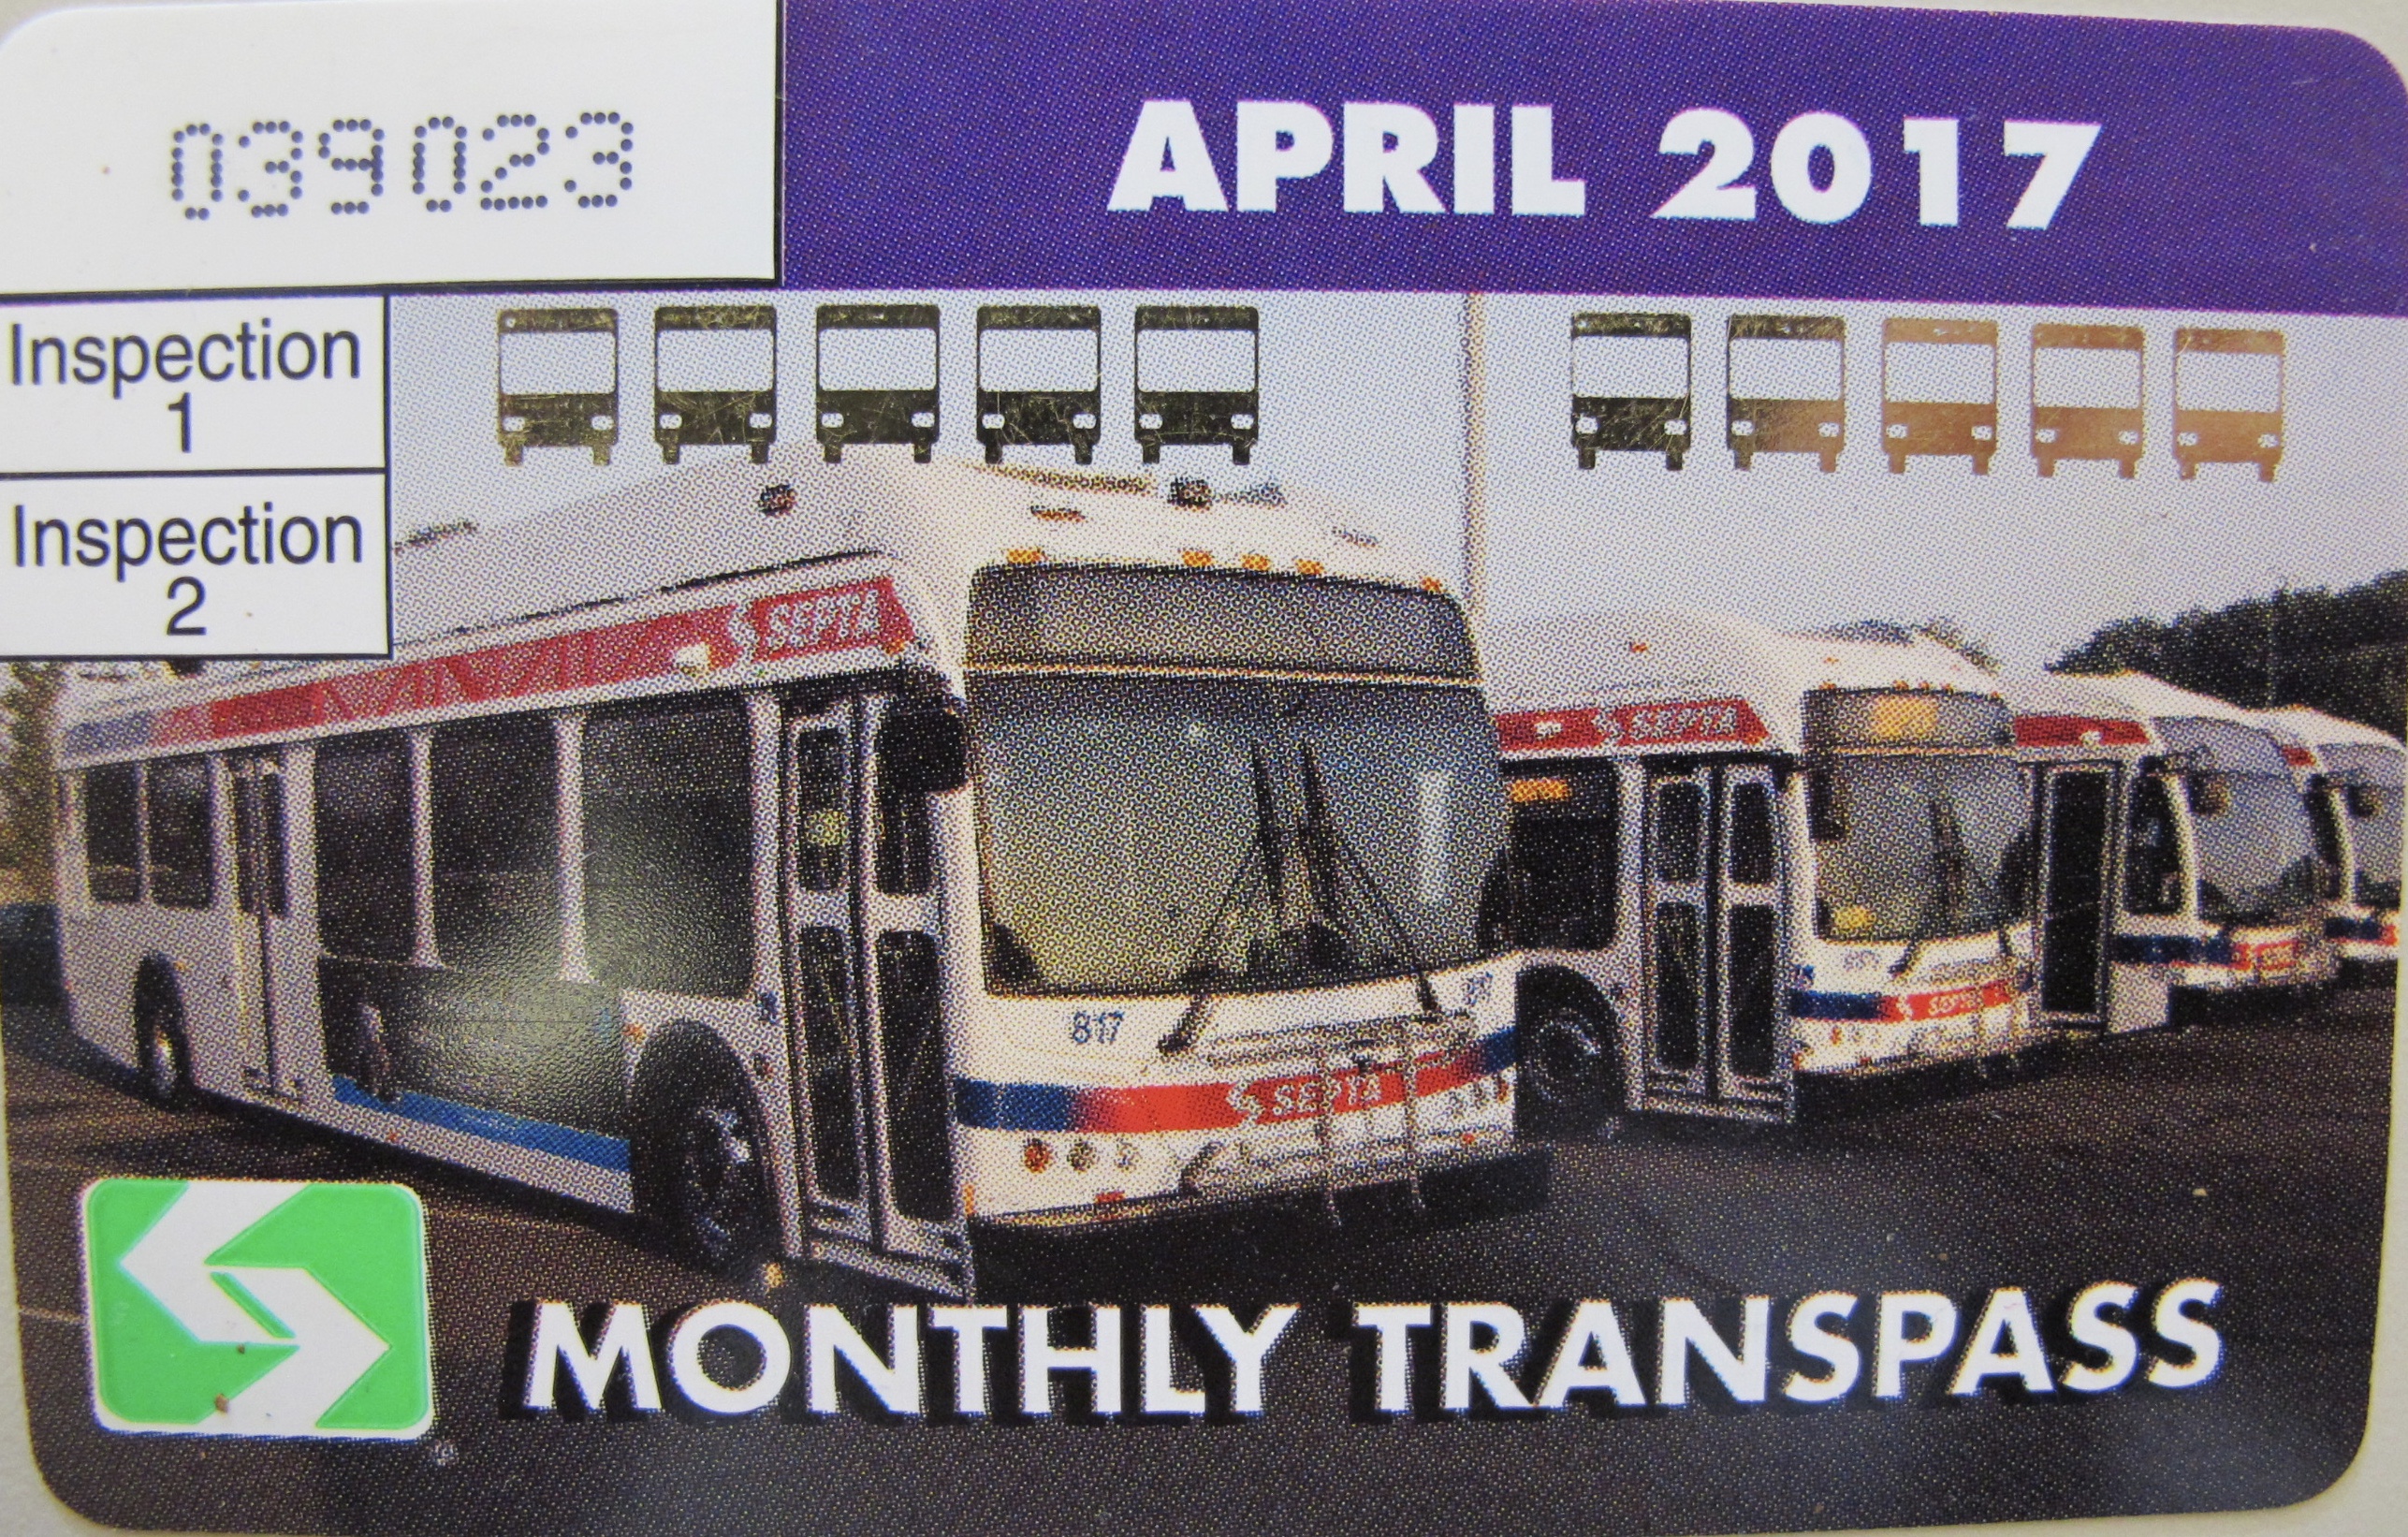 Monthly Transpasses no longer have gendered stickers.